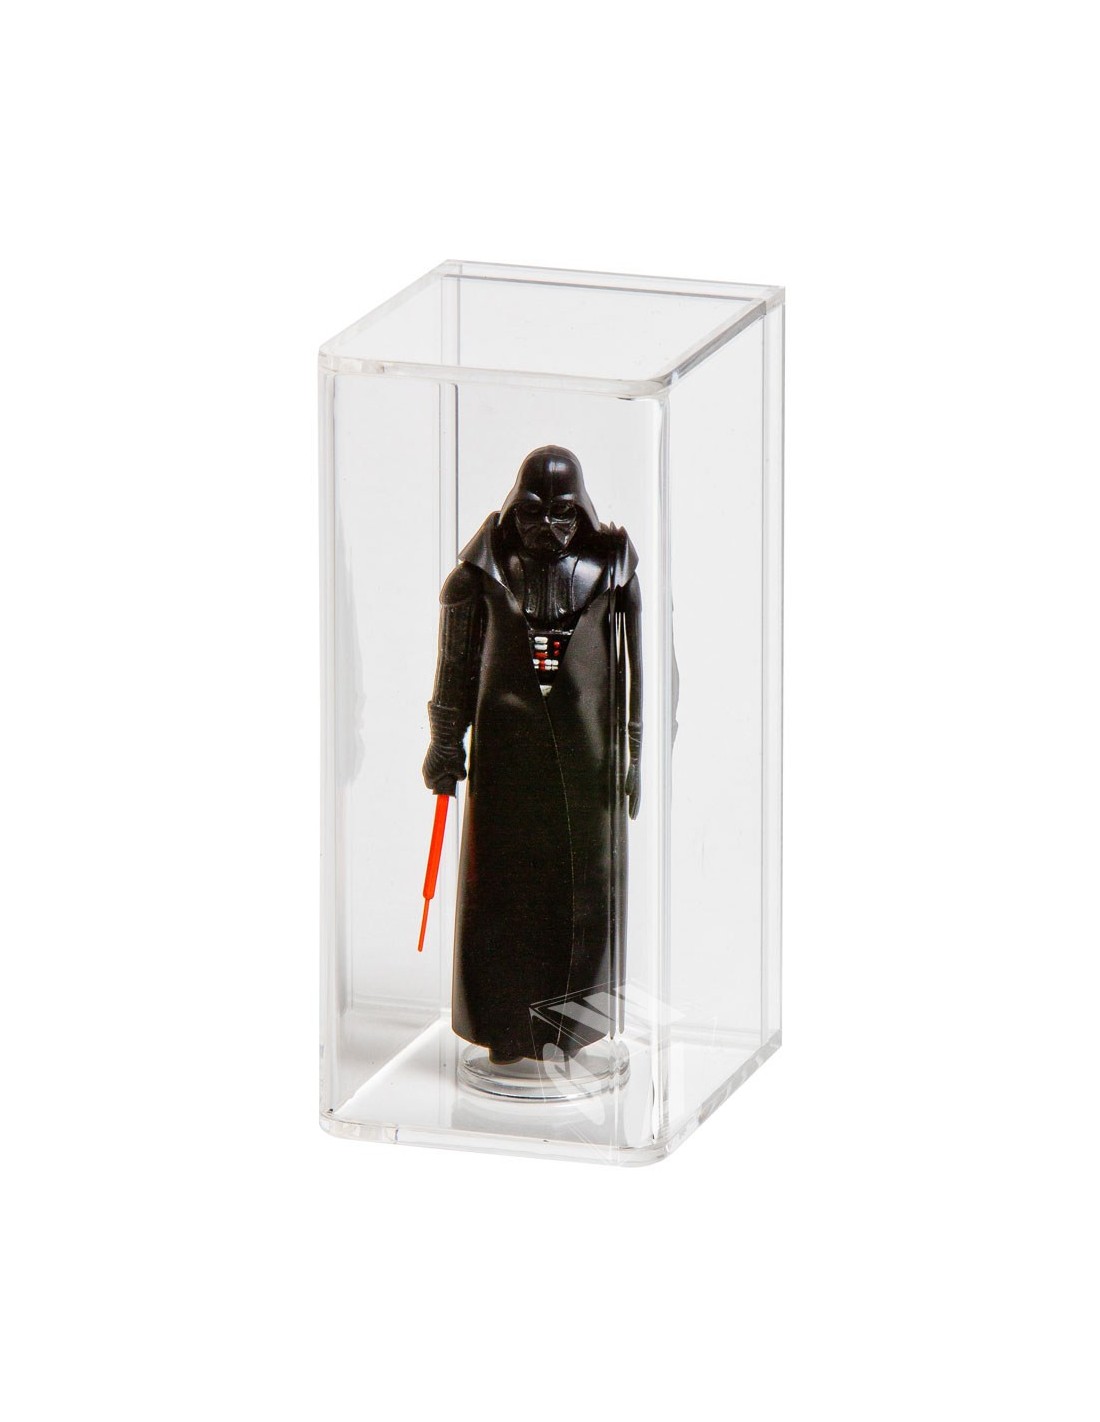 Acrylic cases for action figures